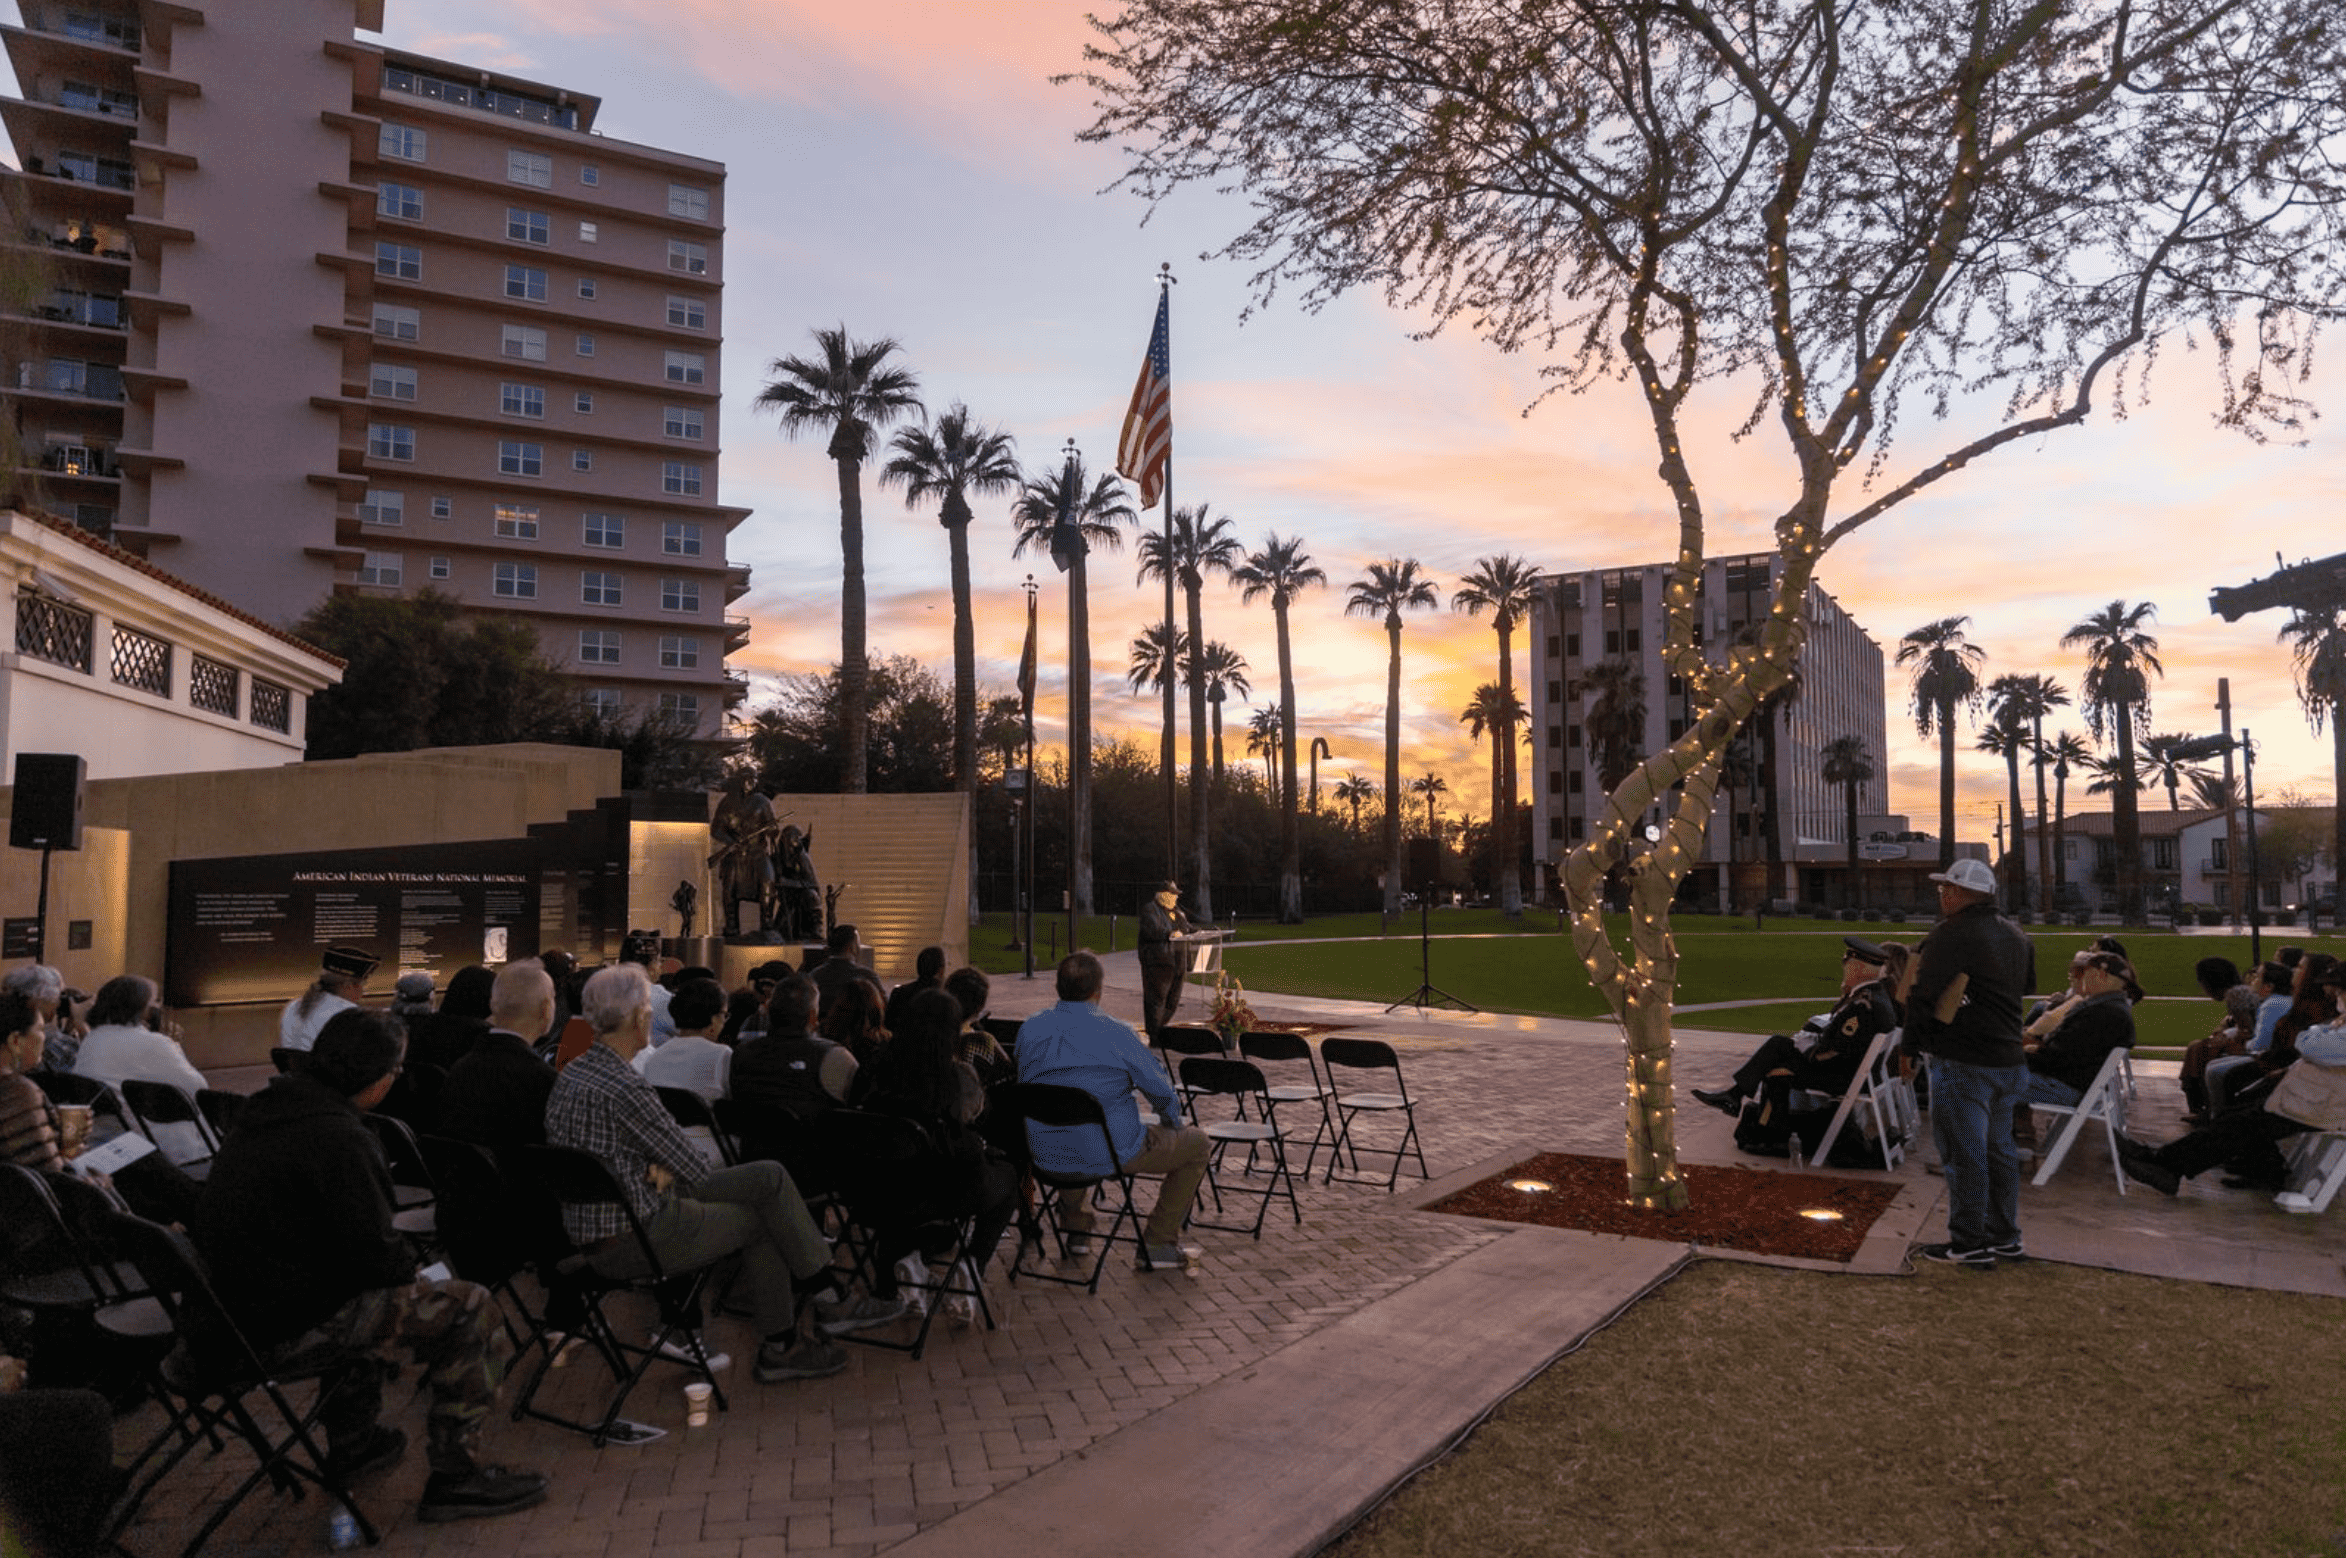 Outdoor event with attendees seated watching a speaker at dusk, surrounded by palm trees and a dramatic sunset, with city buildings in the background.